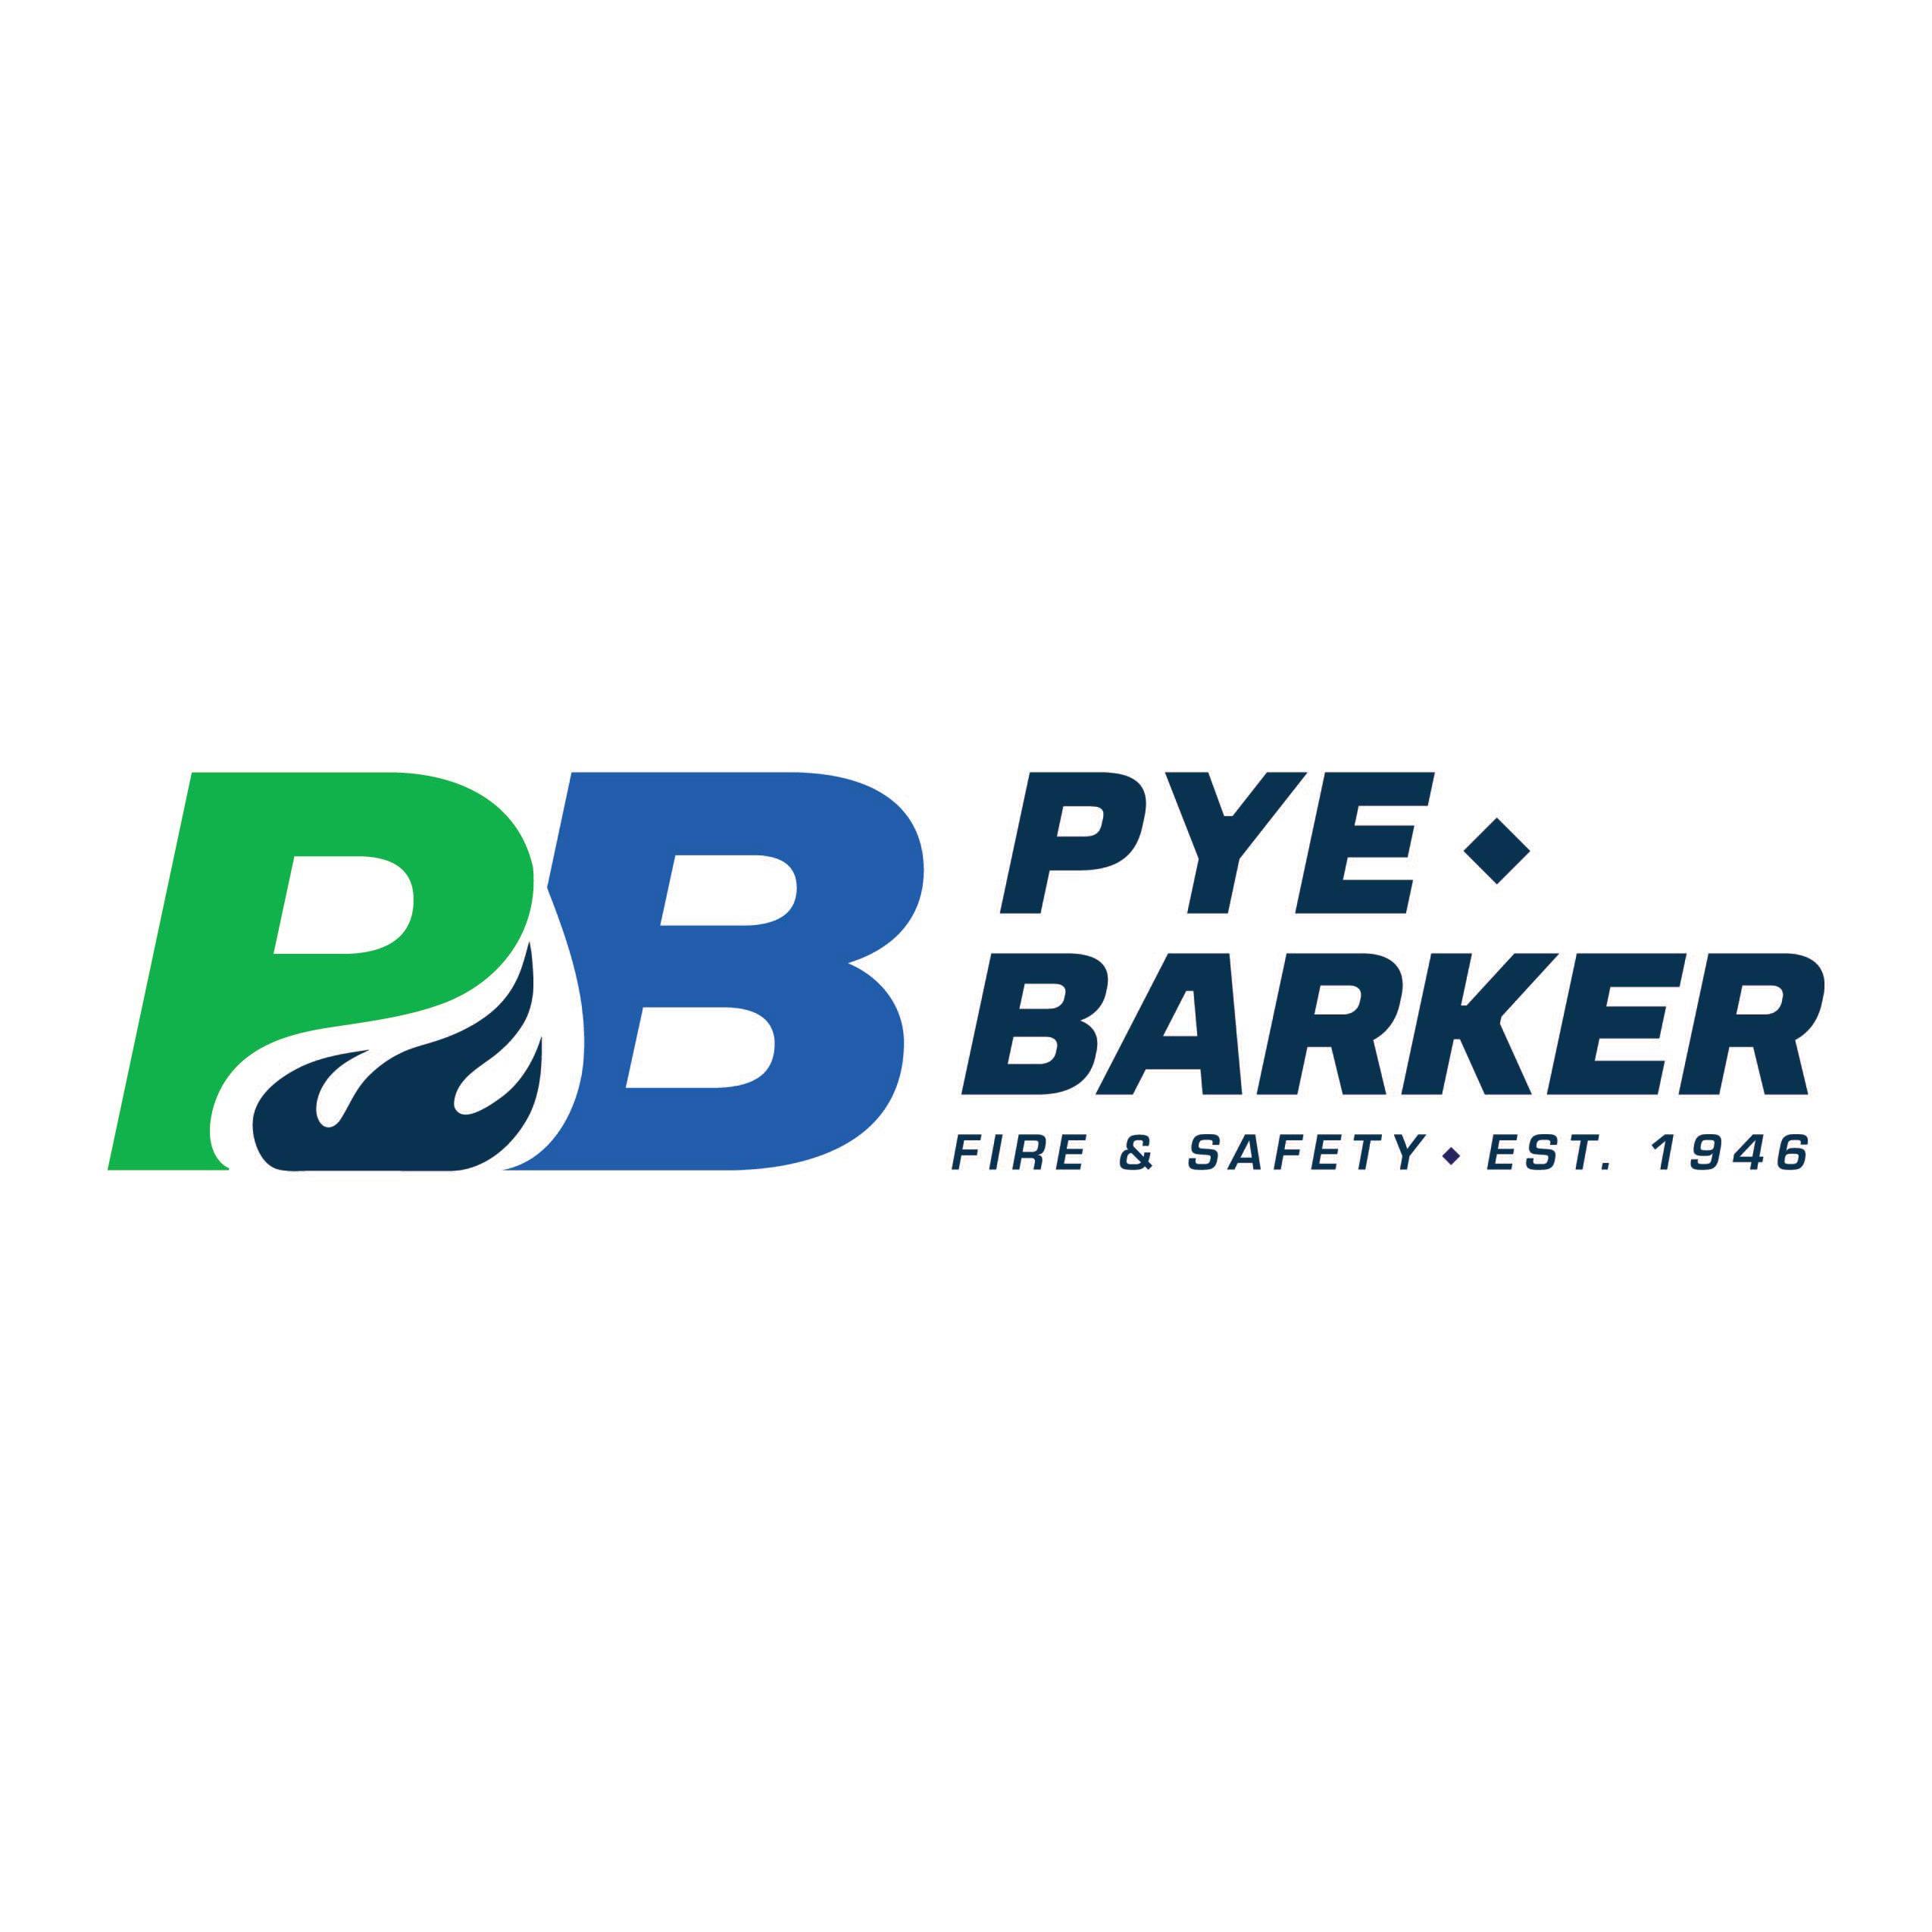 Pye-Barker Fire & Safety - Grand Junction, CO 81505 - (970)243-2262 | ShowMeLocal.com